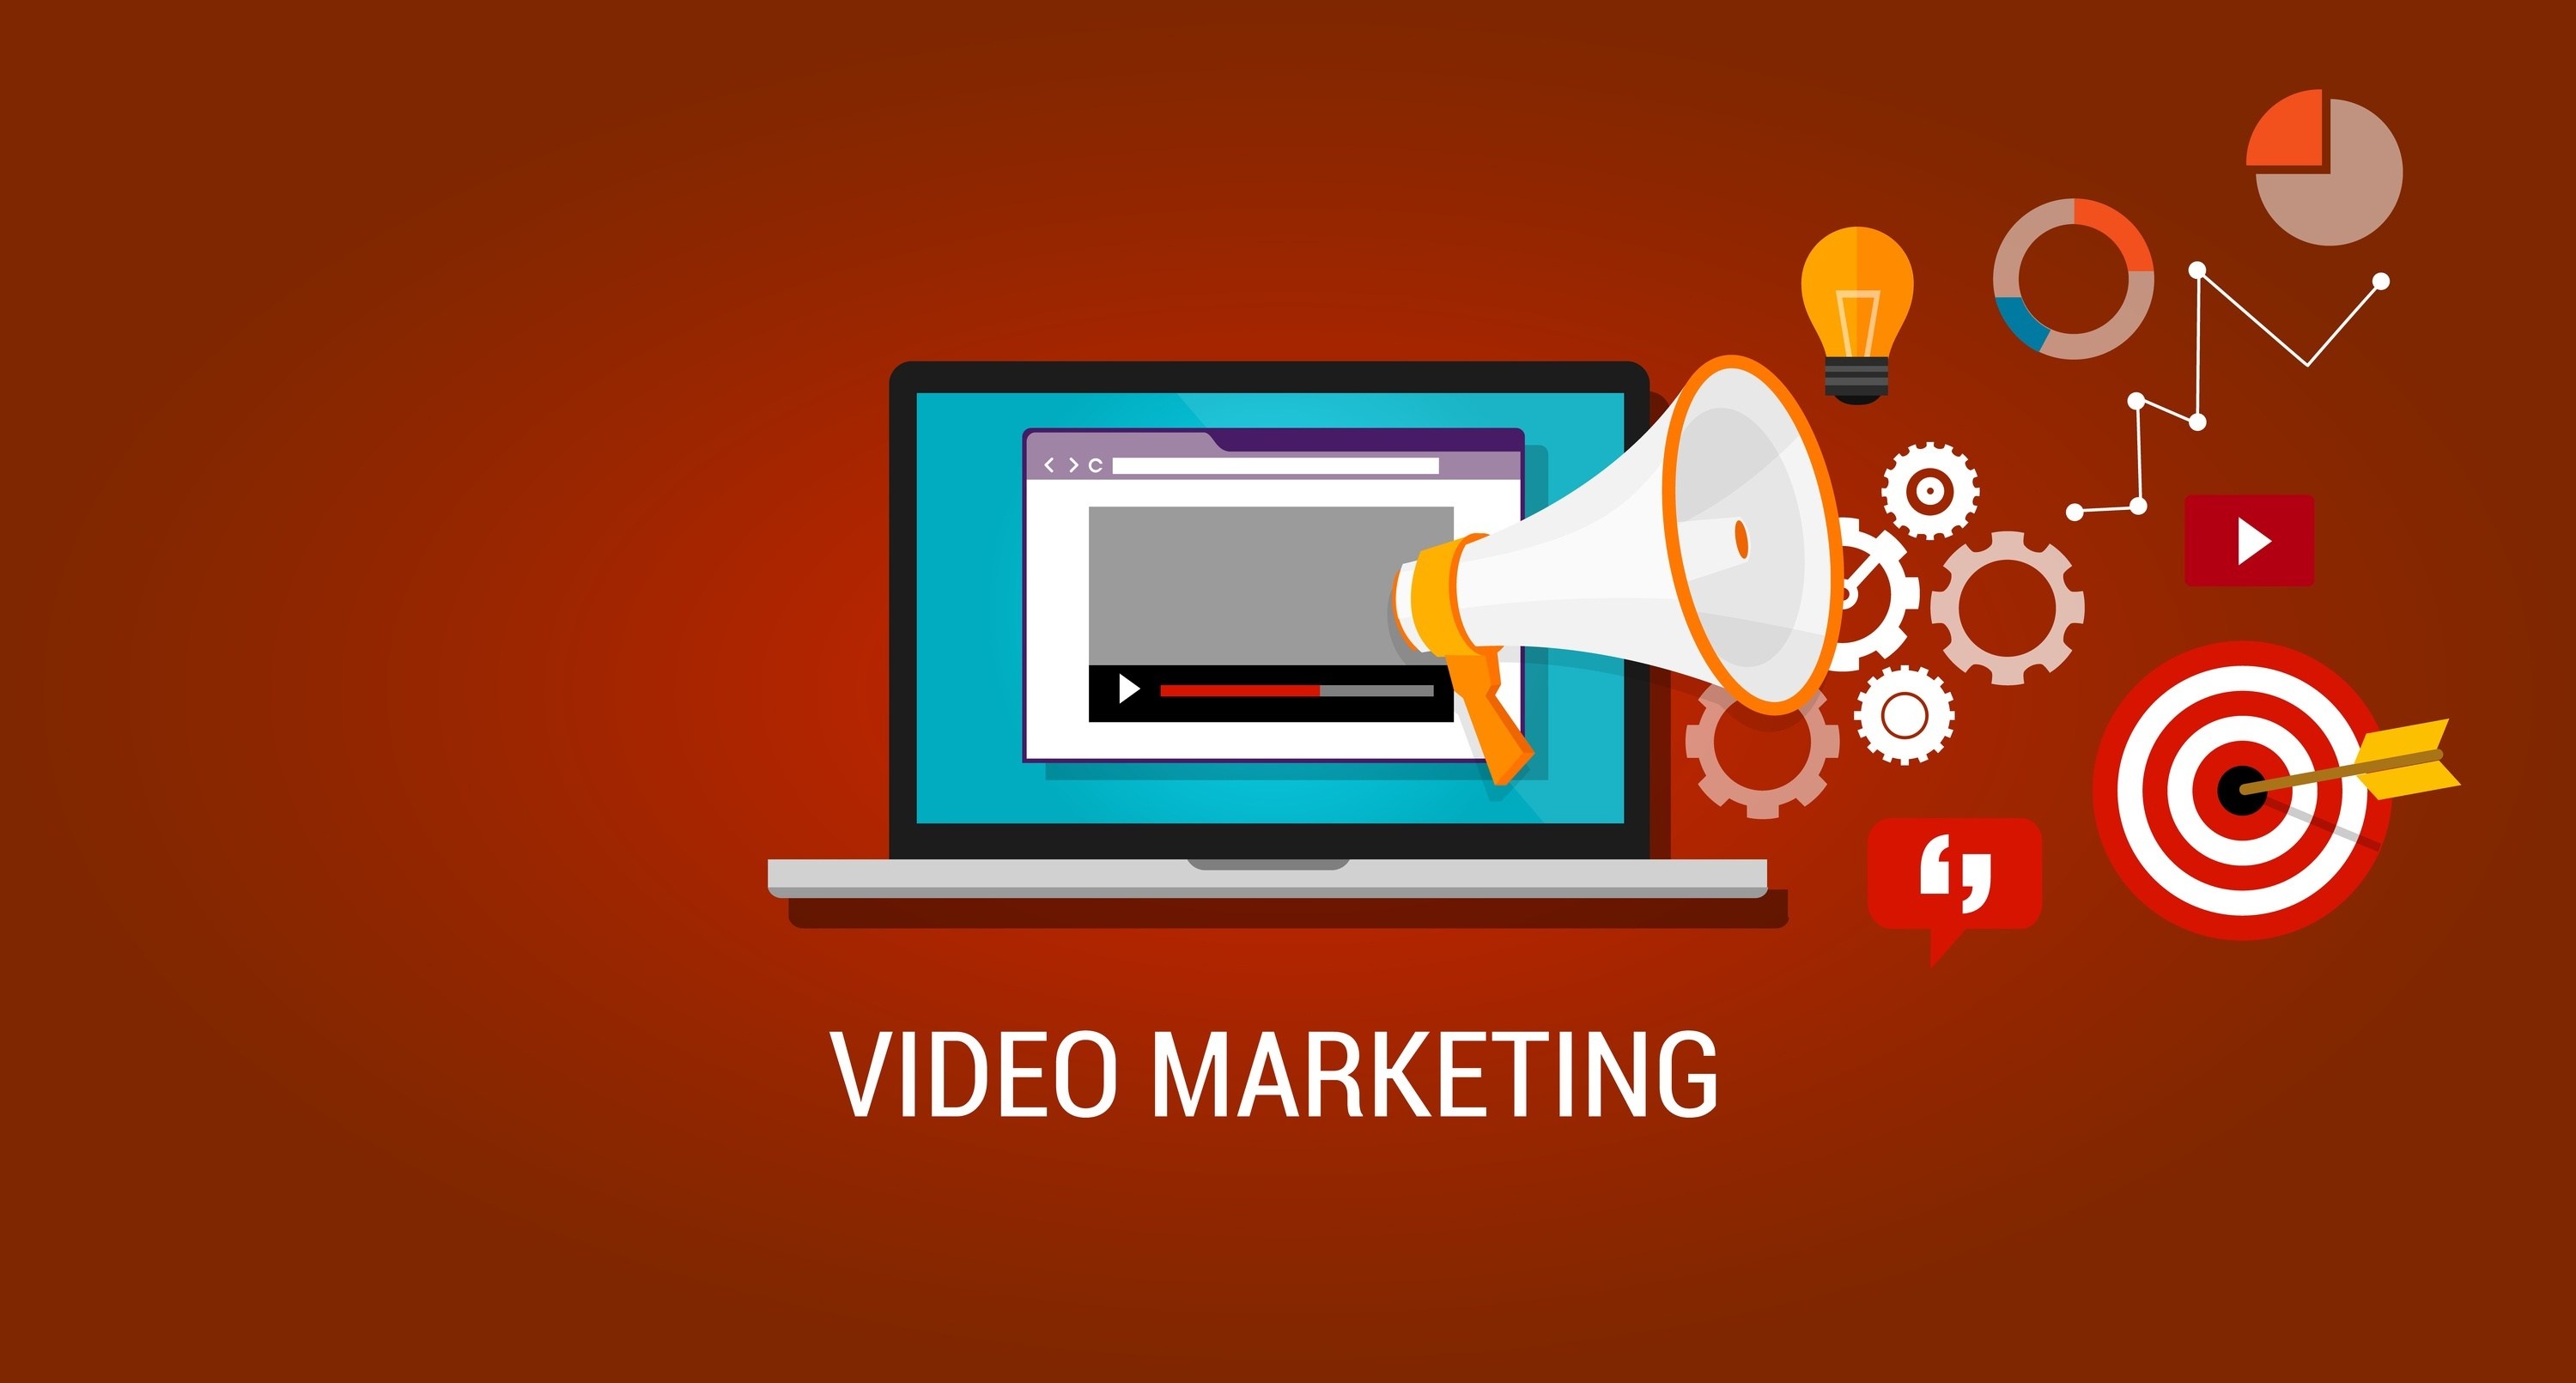 Video Marketing Services - Affordable Costs - Enhance Brand Reach